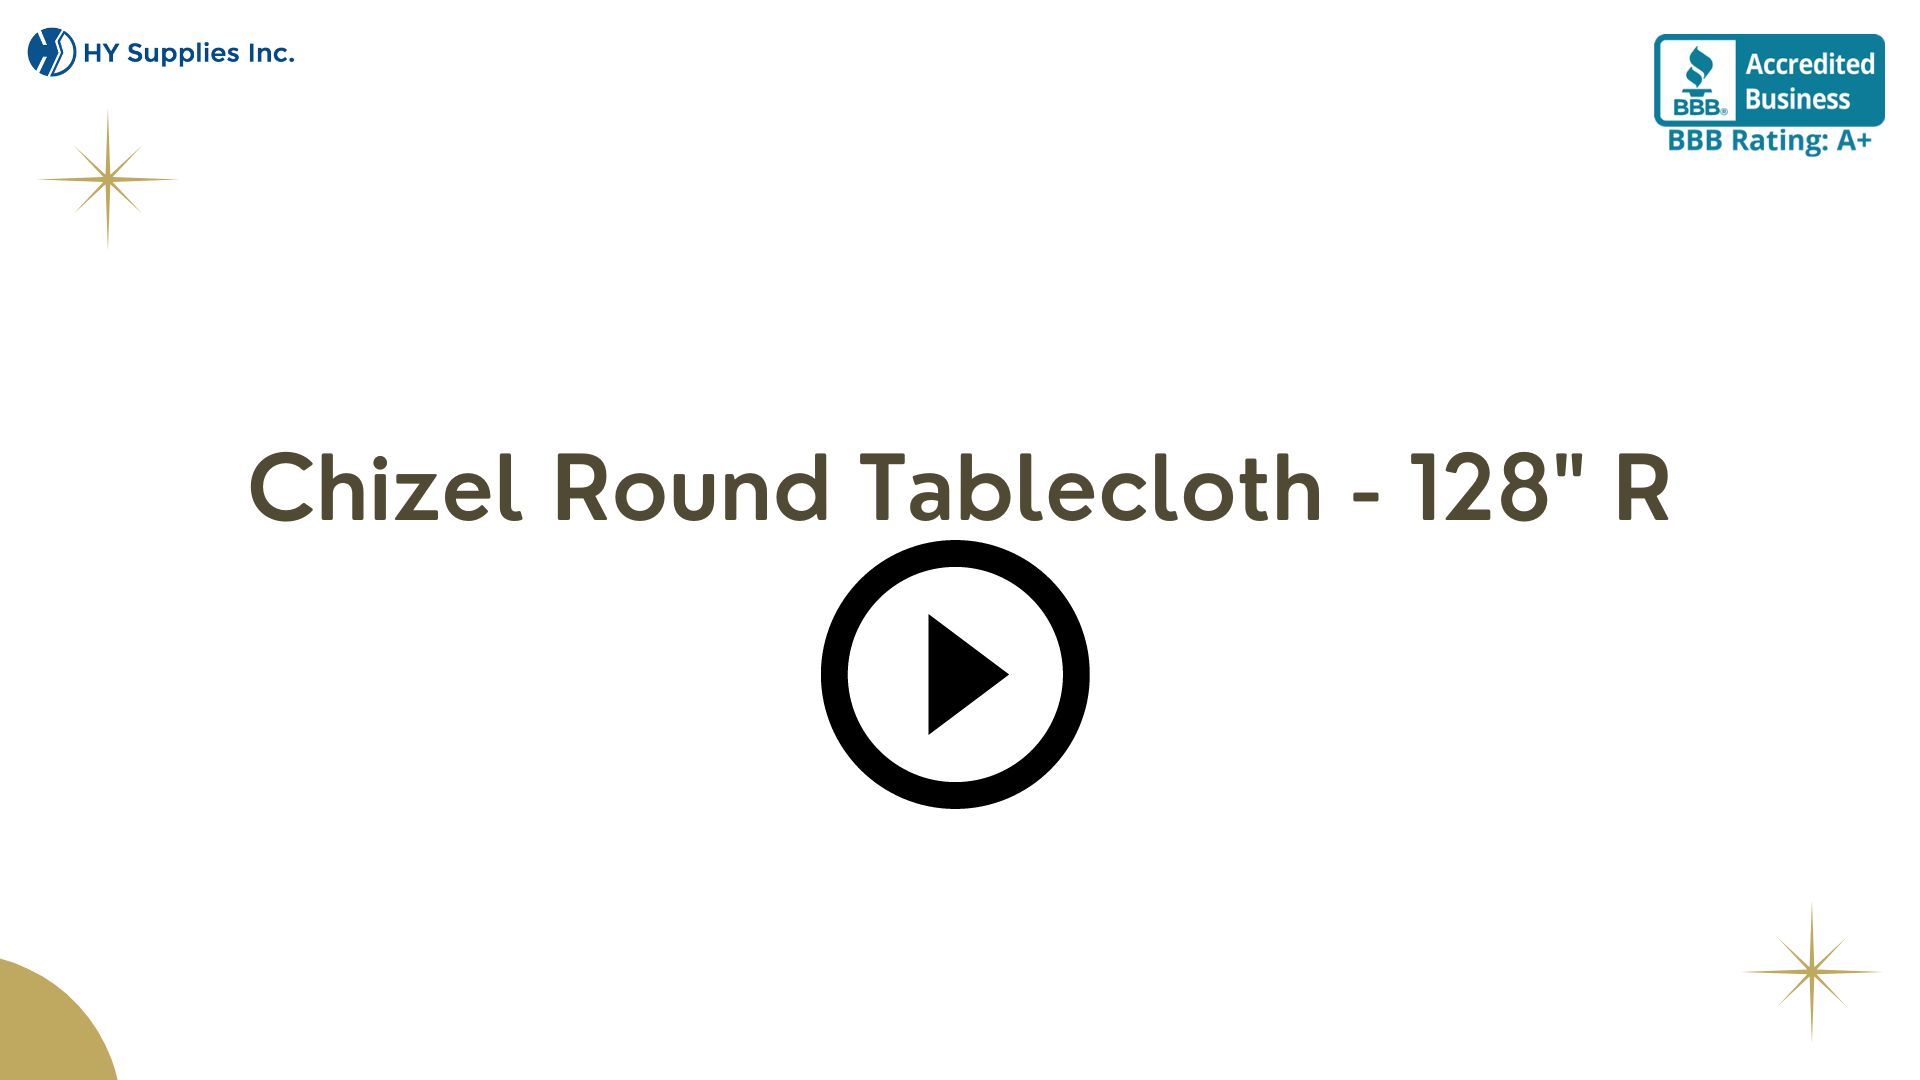 Chizel Round Tablecloth - 128"" R